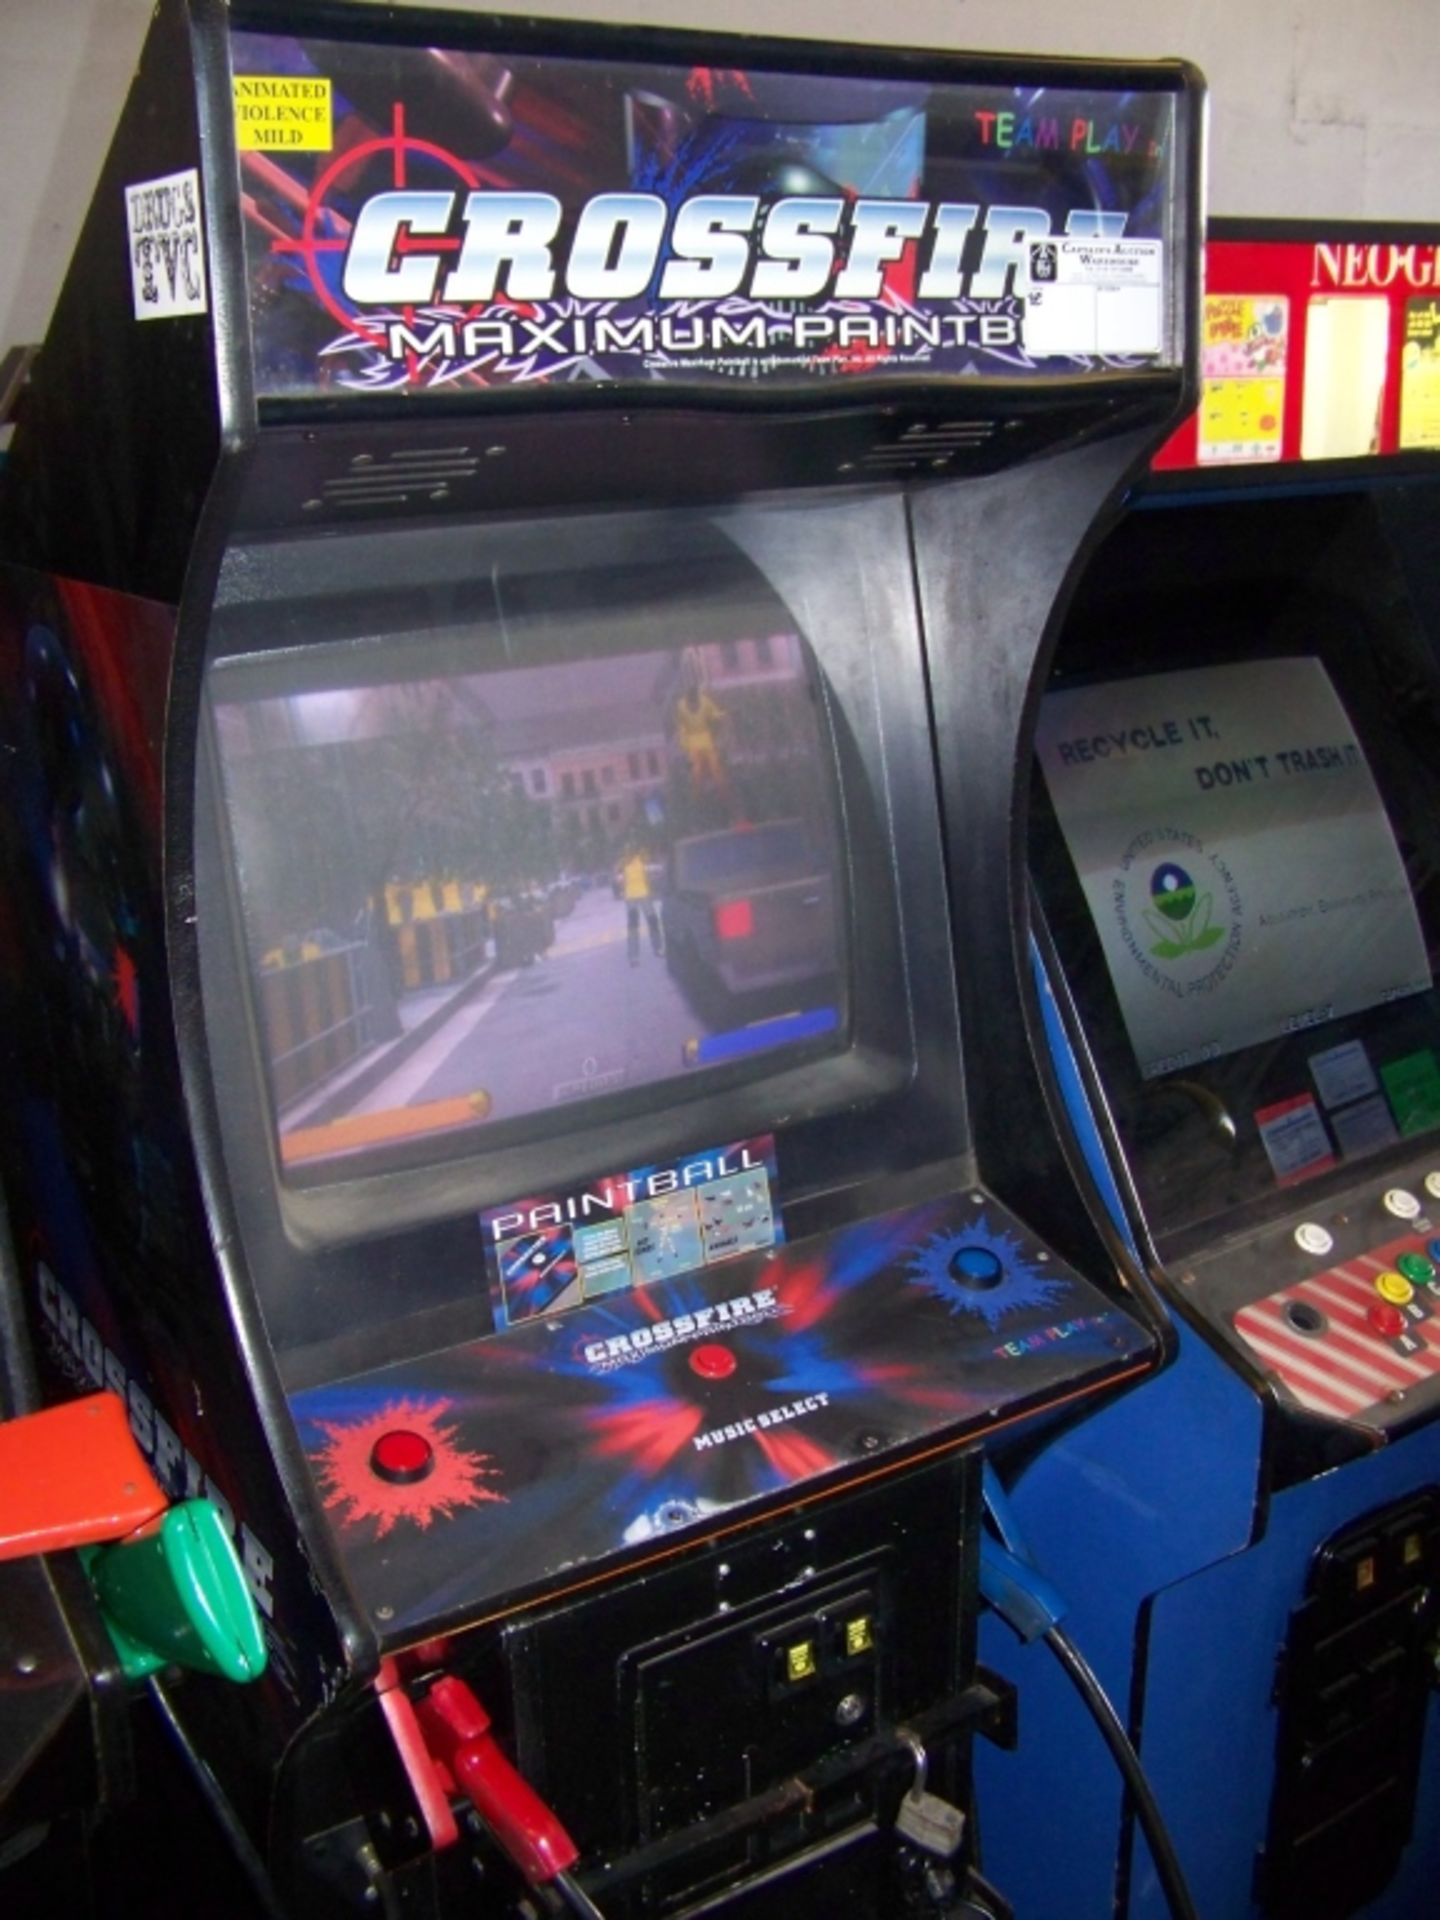 CROSSFIRE PAINTBALL SHOOTER ARCADE GAME Item is in used condition. Evidence of wear and commercial